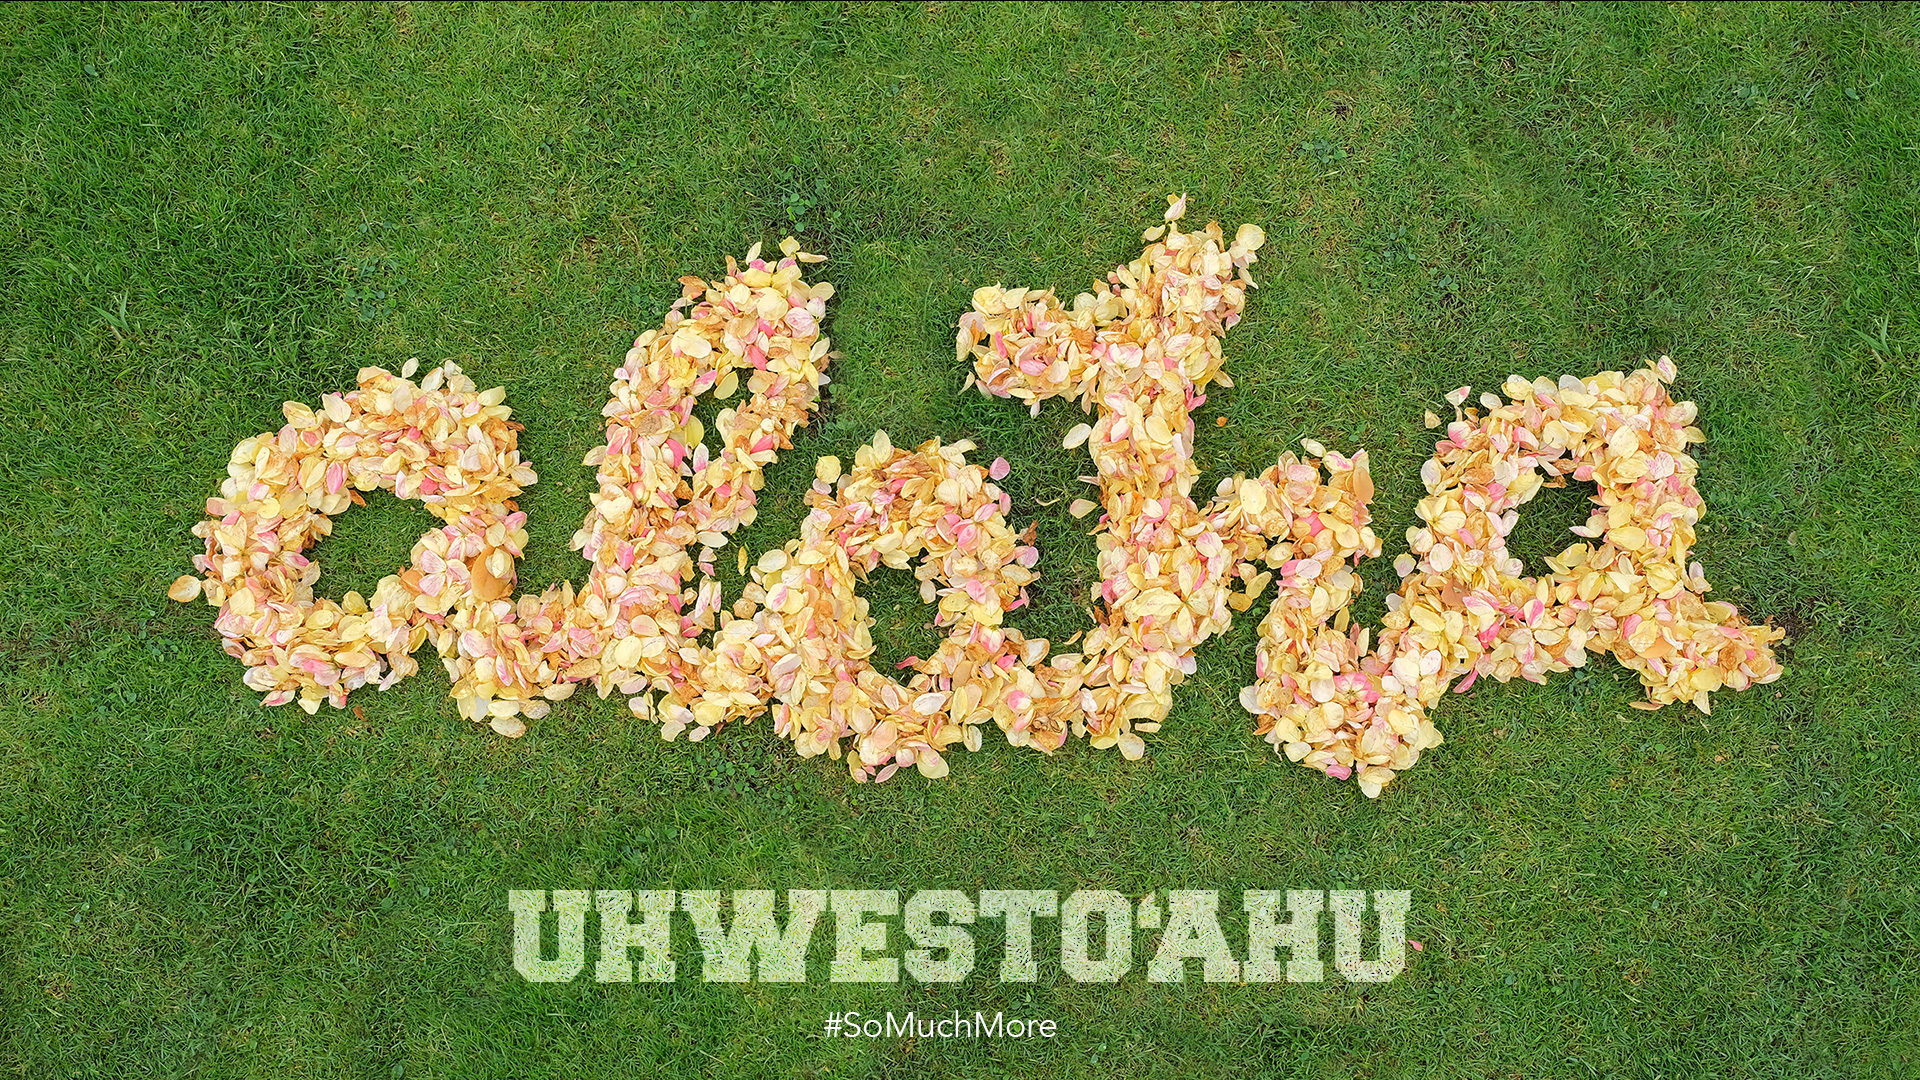 The words Aloha written on the great lawn made out of flower petals.